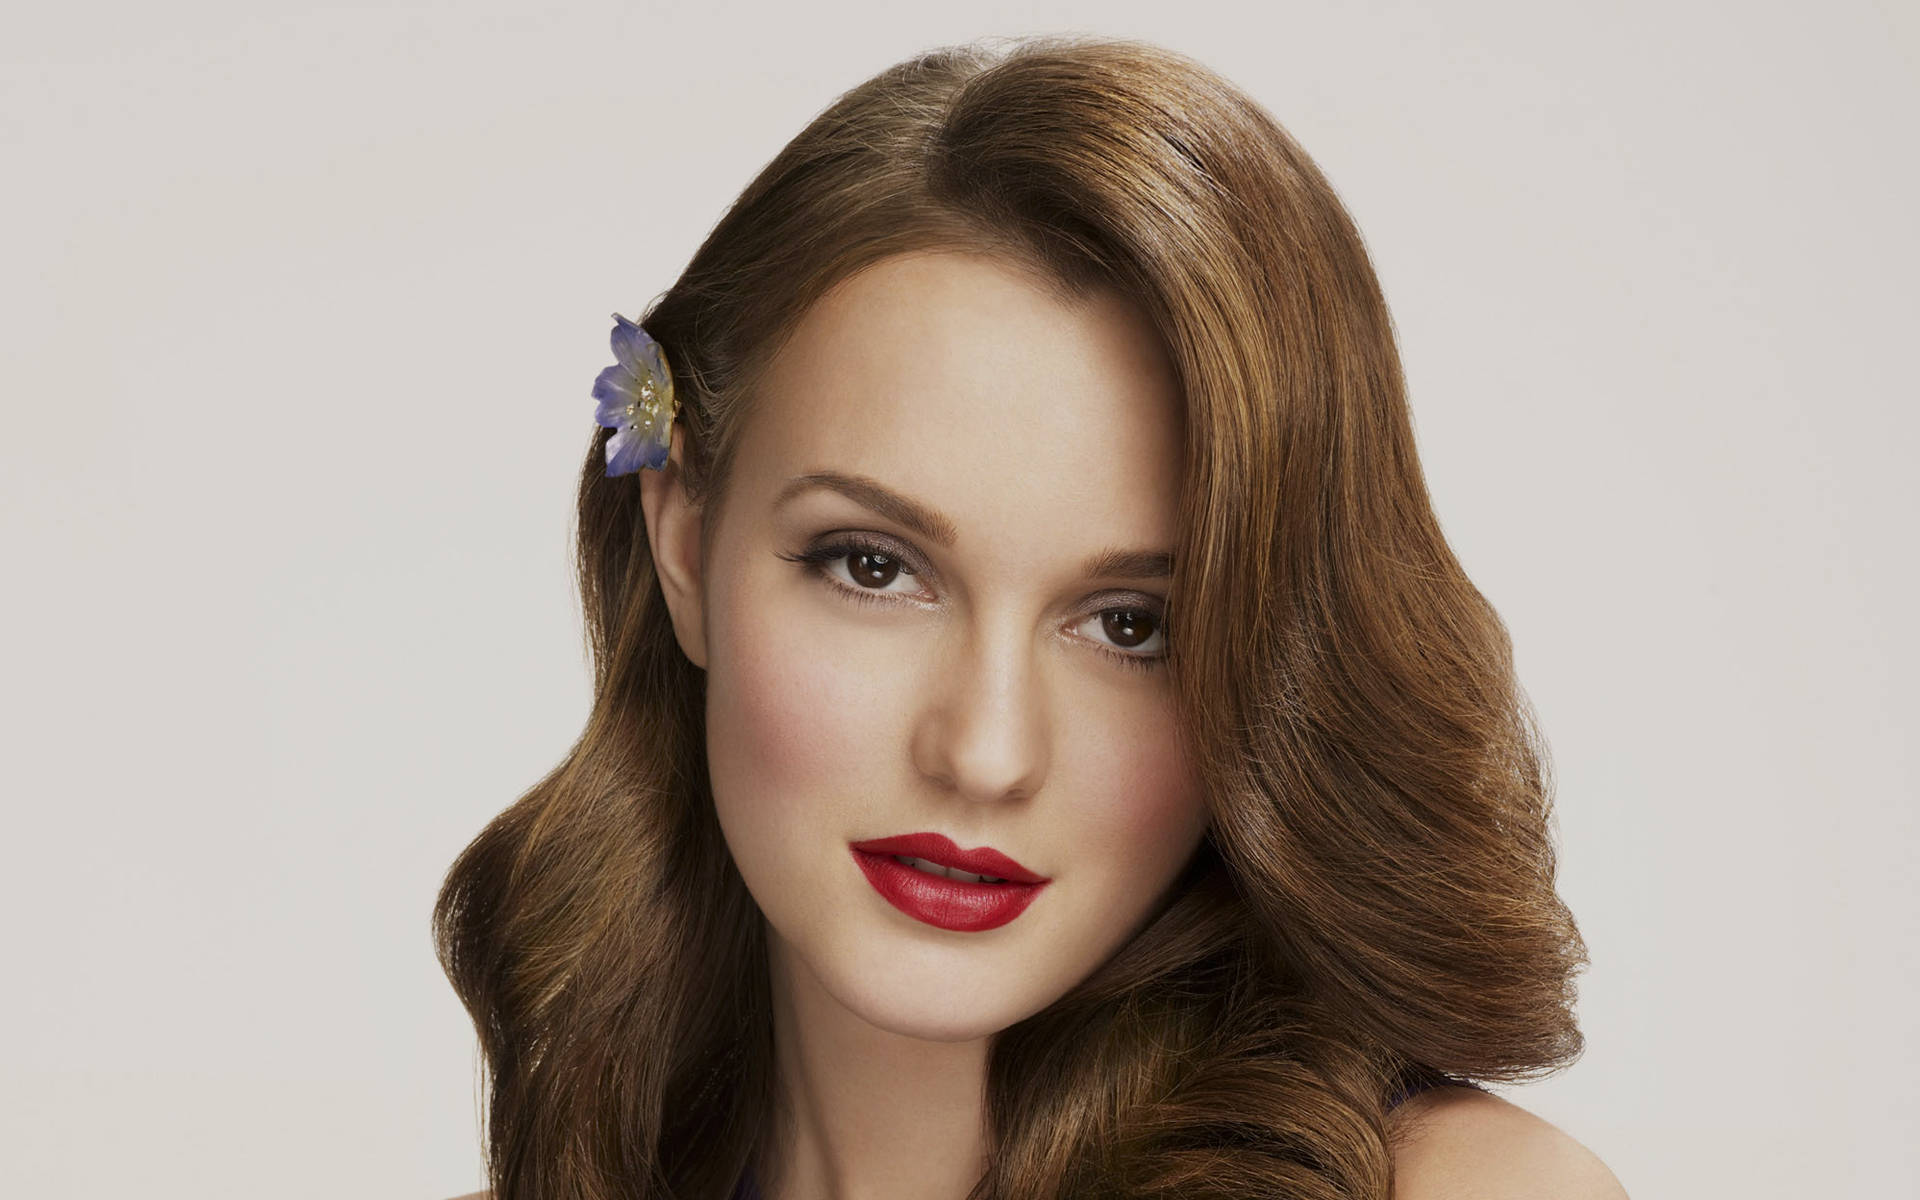 Leighton Meester Wallpaper Images